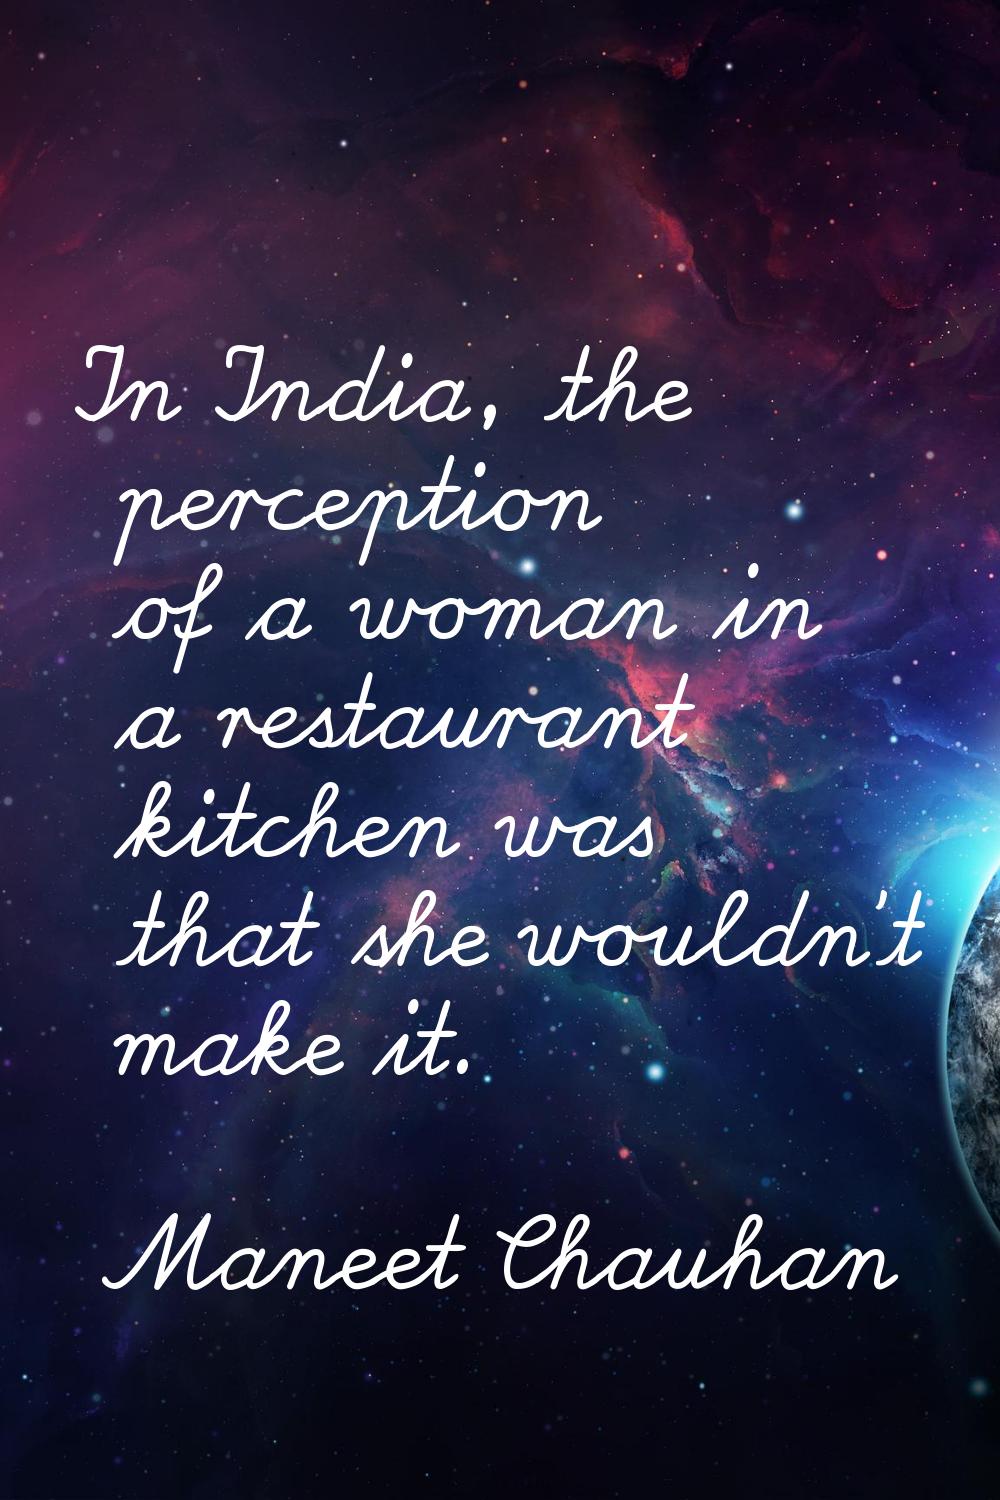 In India, the perception of a woman in a restaurant kitchen was that she wouldn't make it.